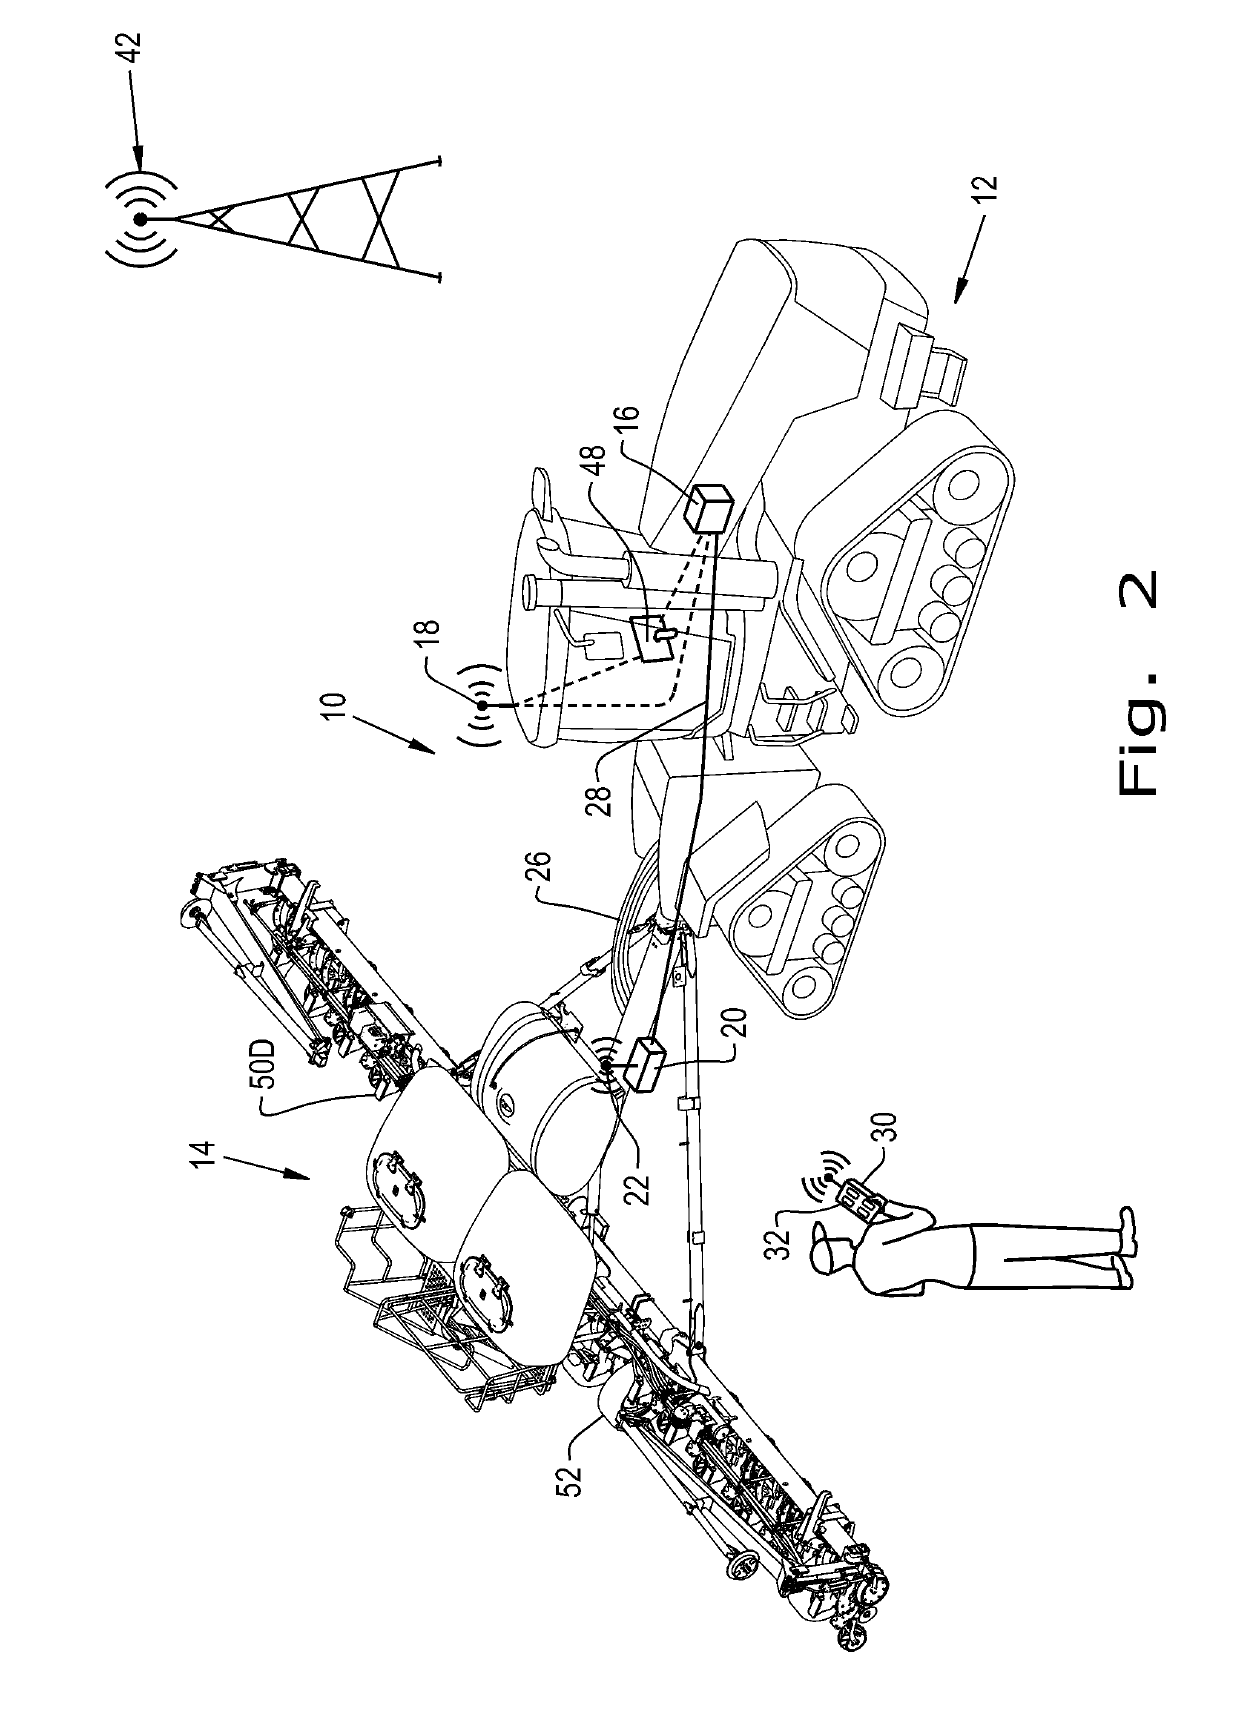 Method of adjusting tillage equipment remotely from outside a tractor cab